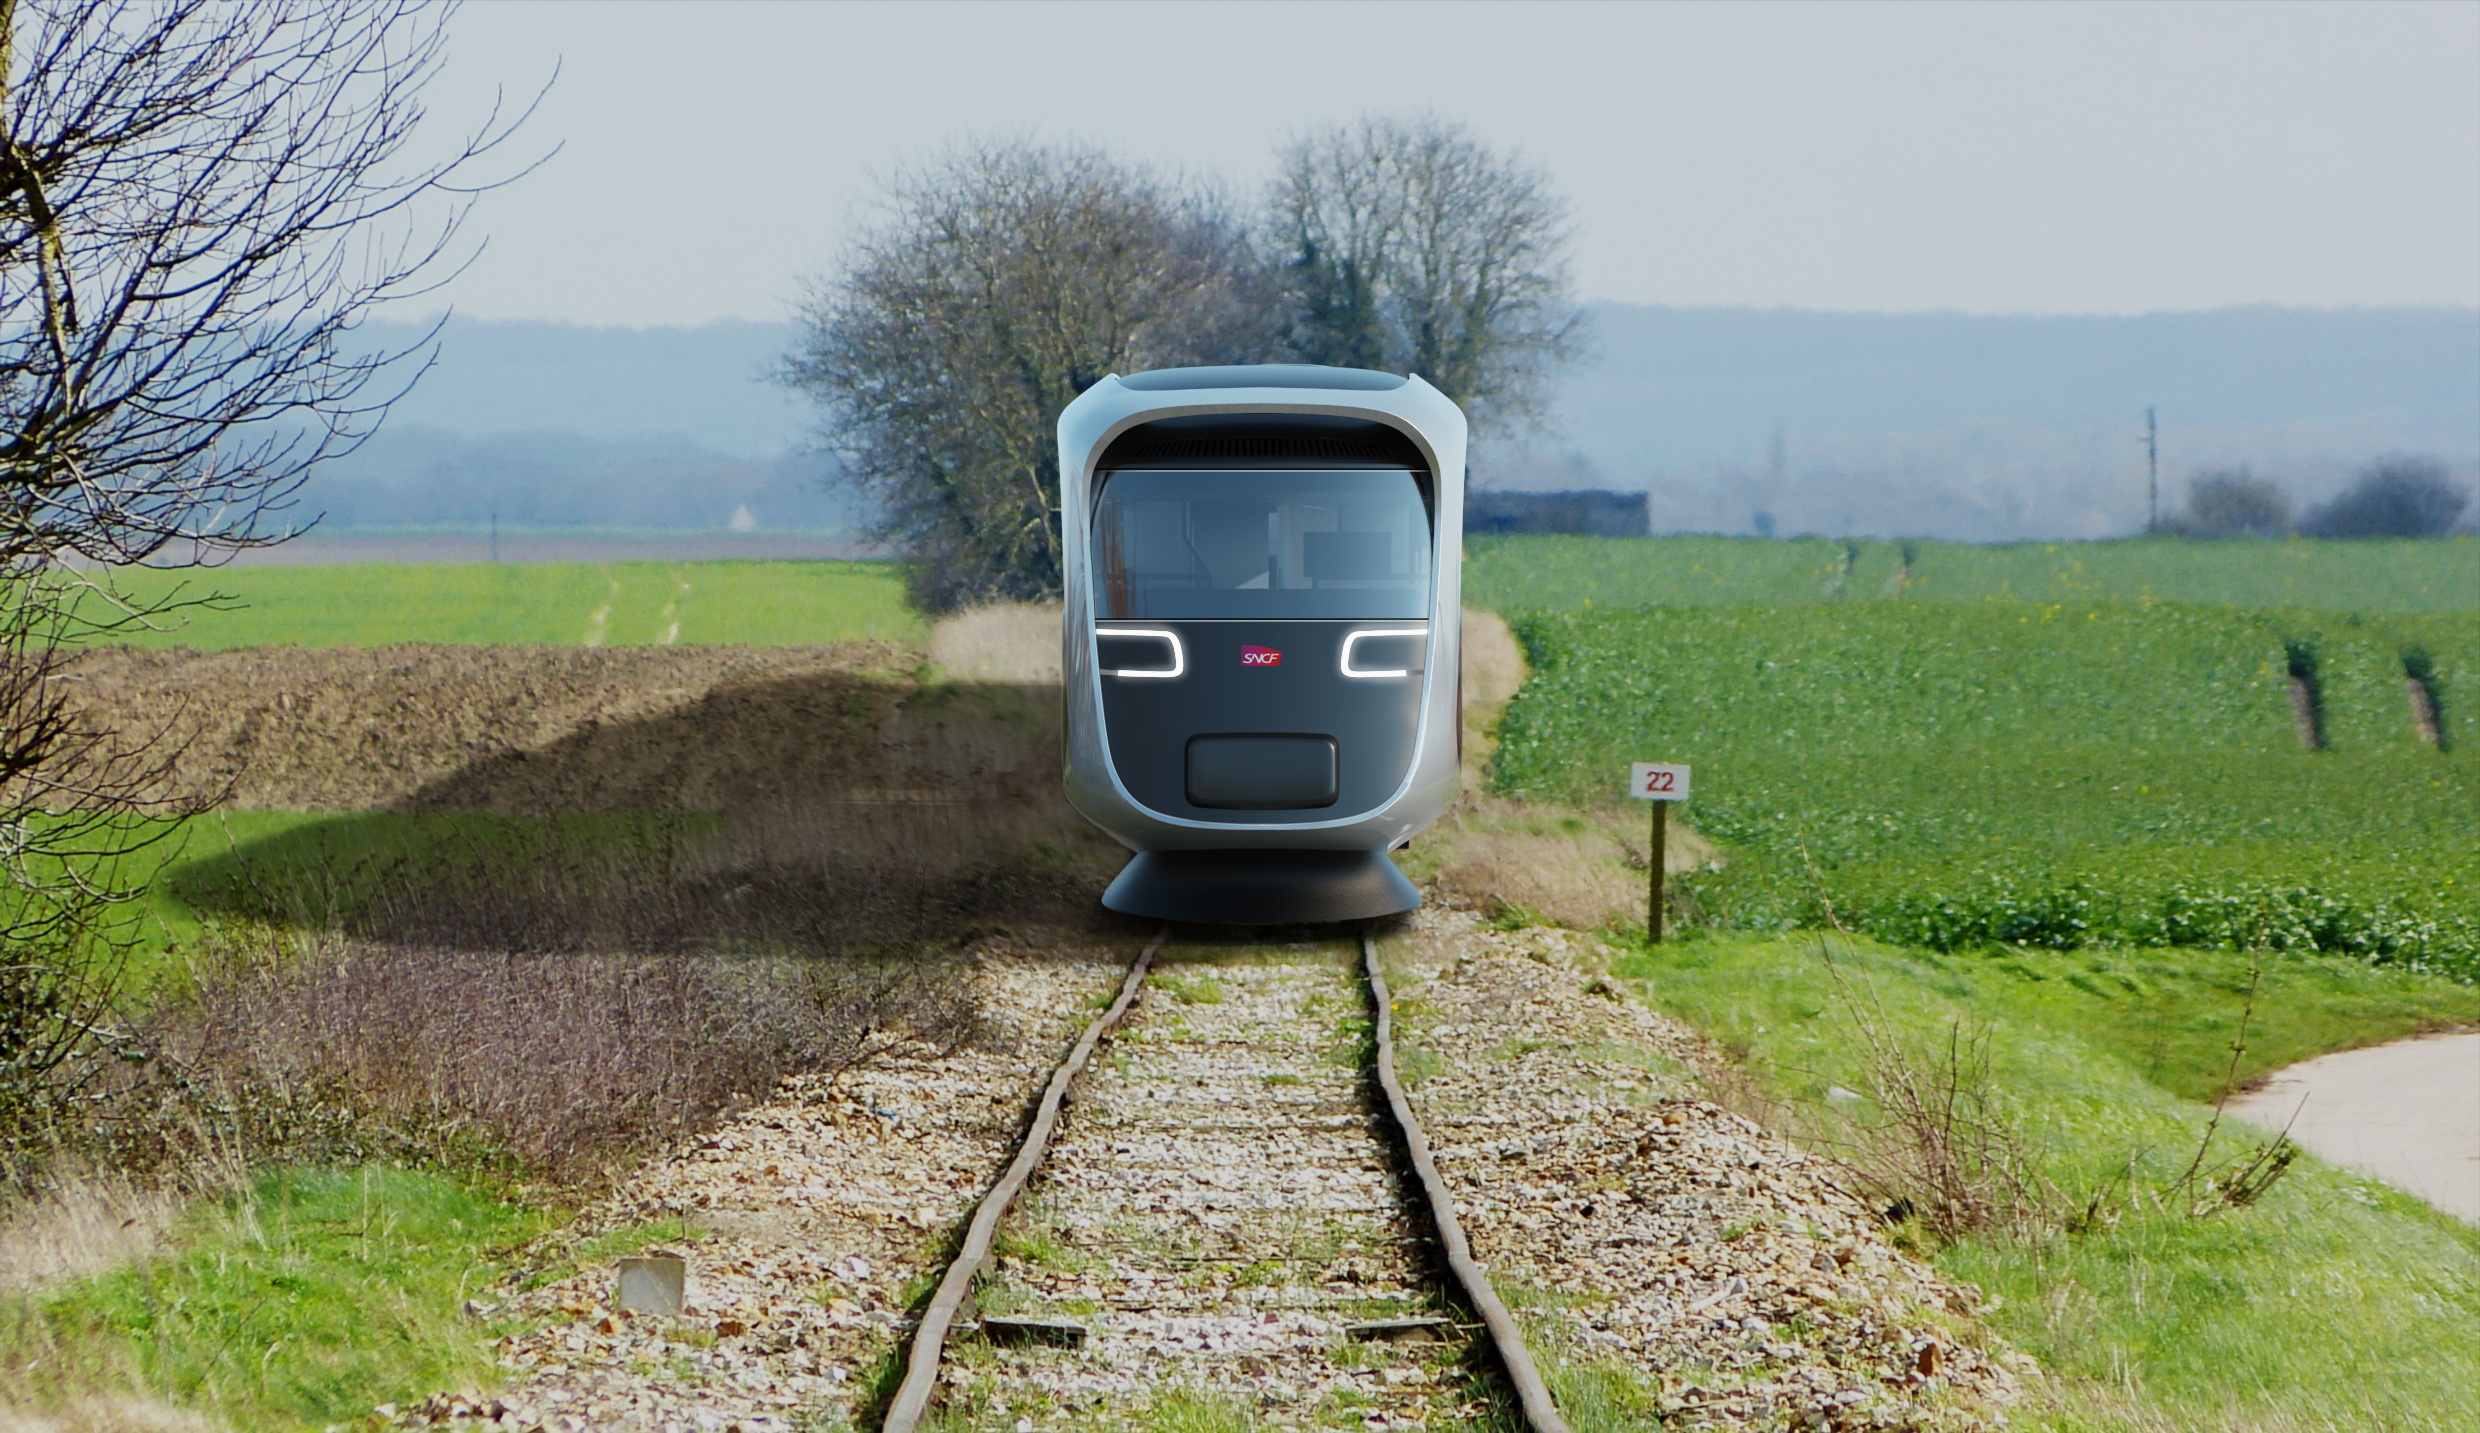 The Innovative Light Train will serve rural areas and feed main train lines to bring life back to some older railway tracks